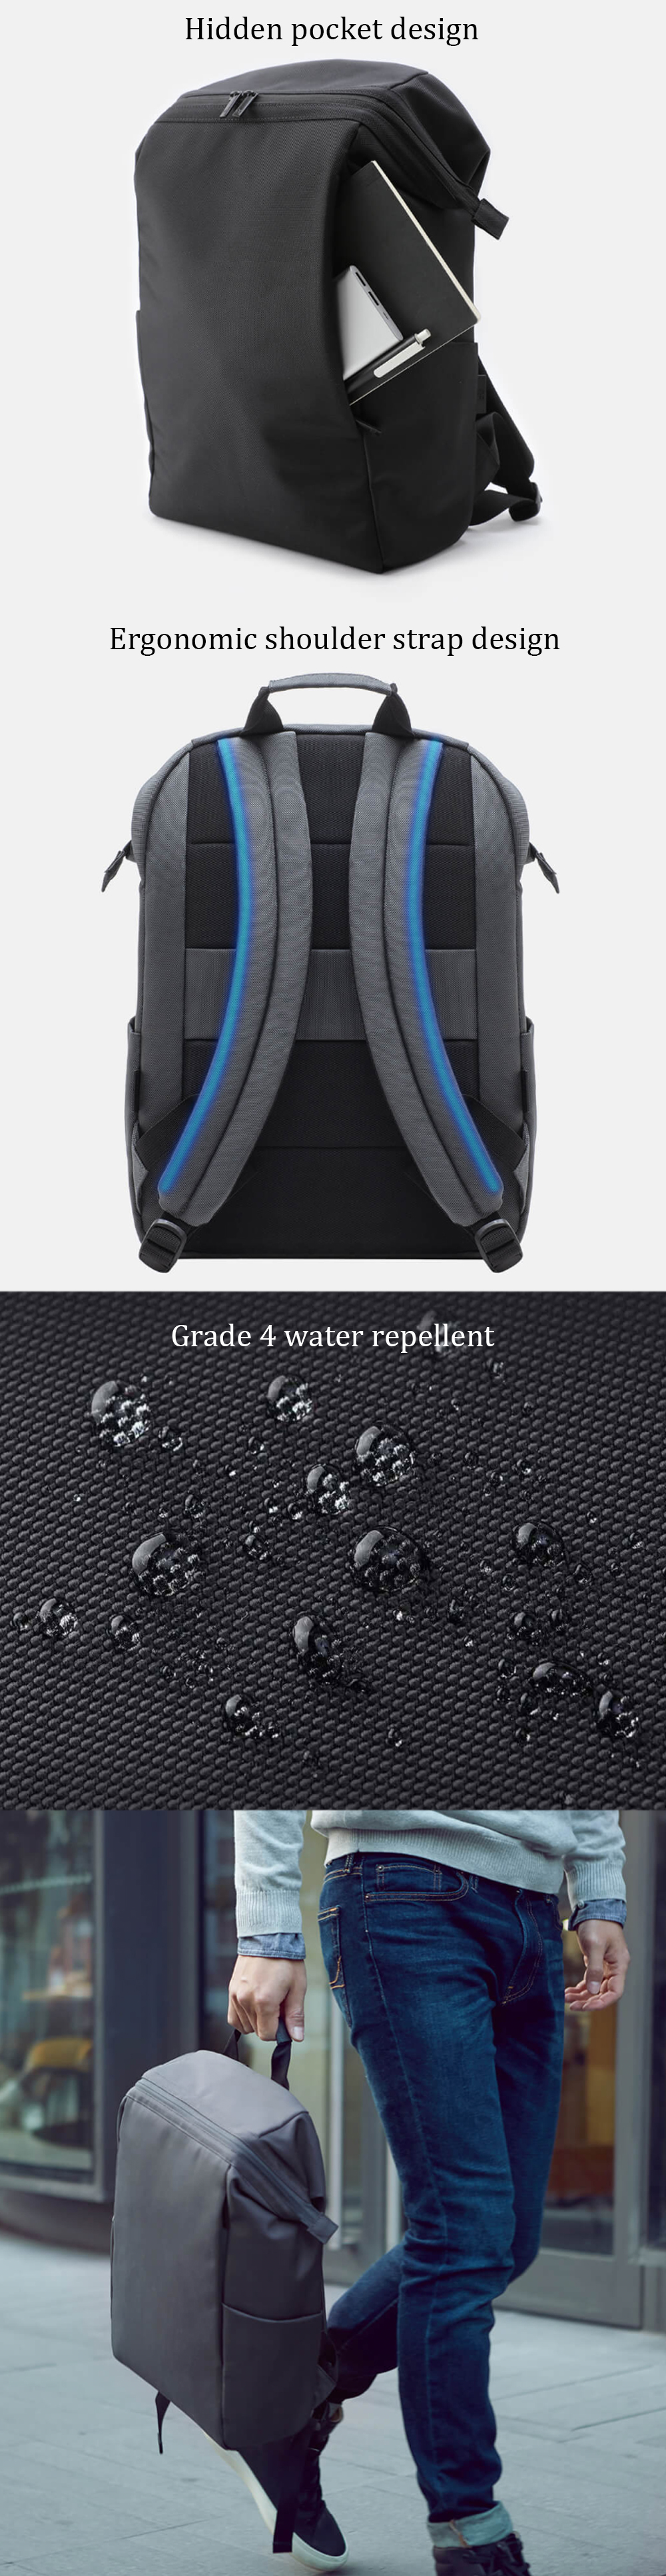 90FUN-Backpack-156inch-Laptop-Bag-IPX4-Waterproof-Travel-Leisure-Shoulder-Bag-for-Camping-Business-T-1739732-3